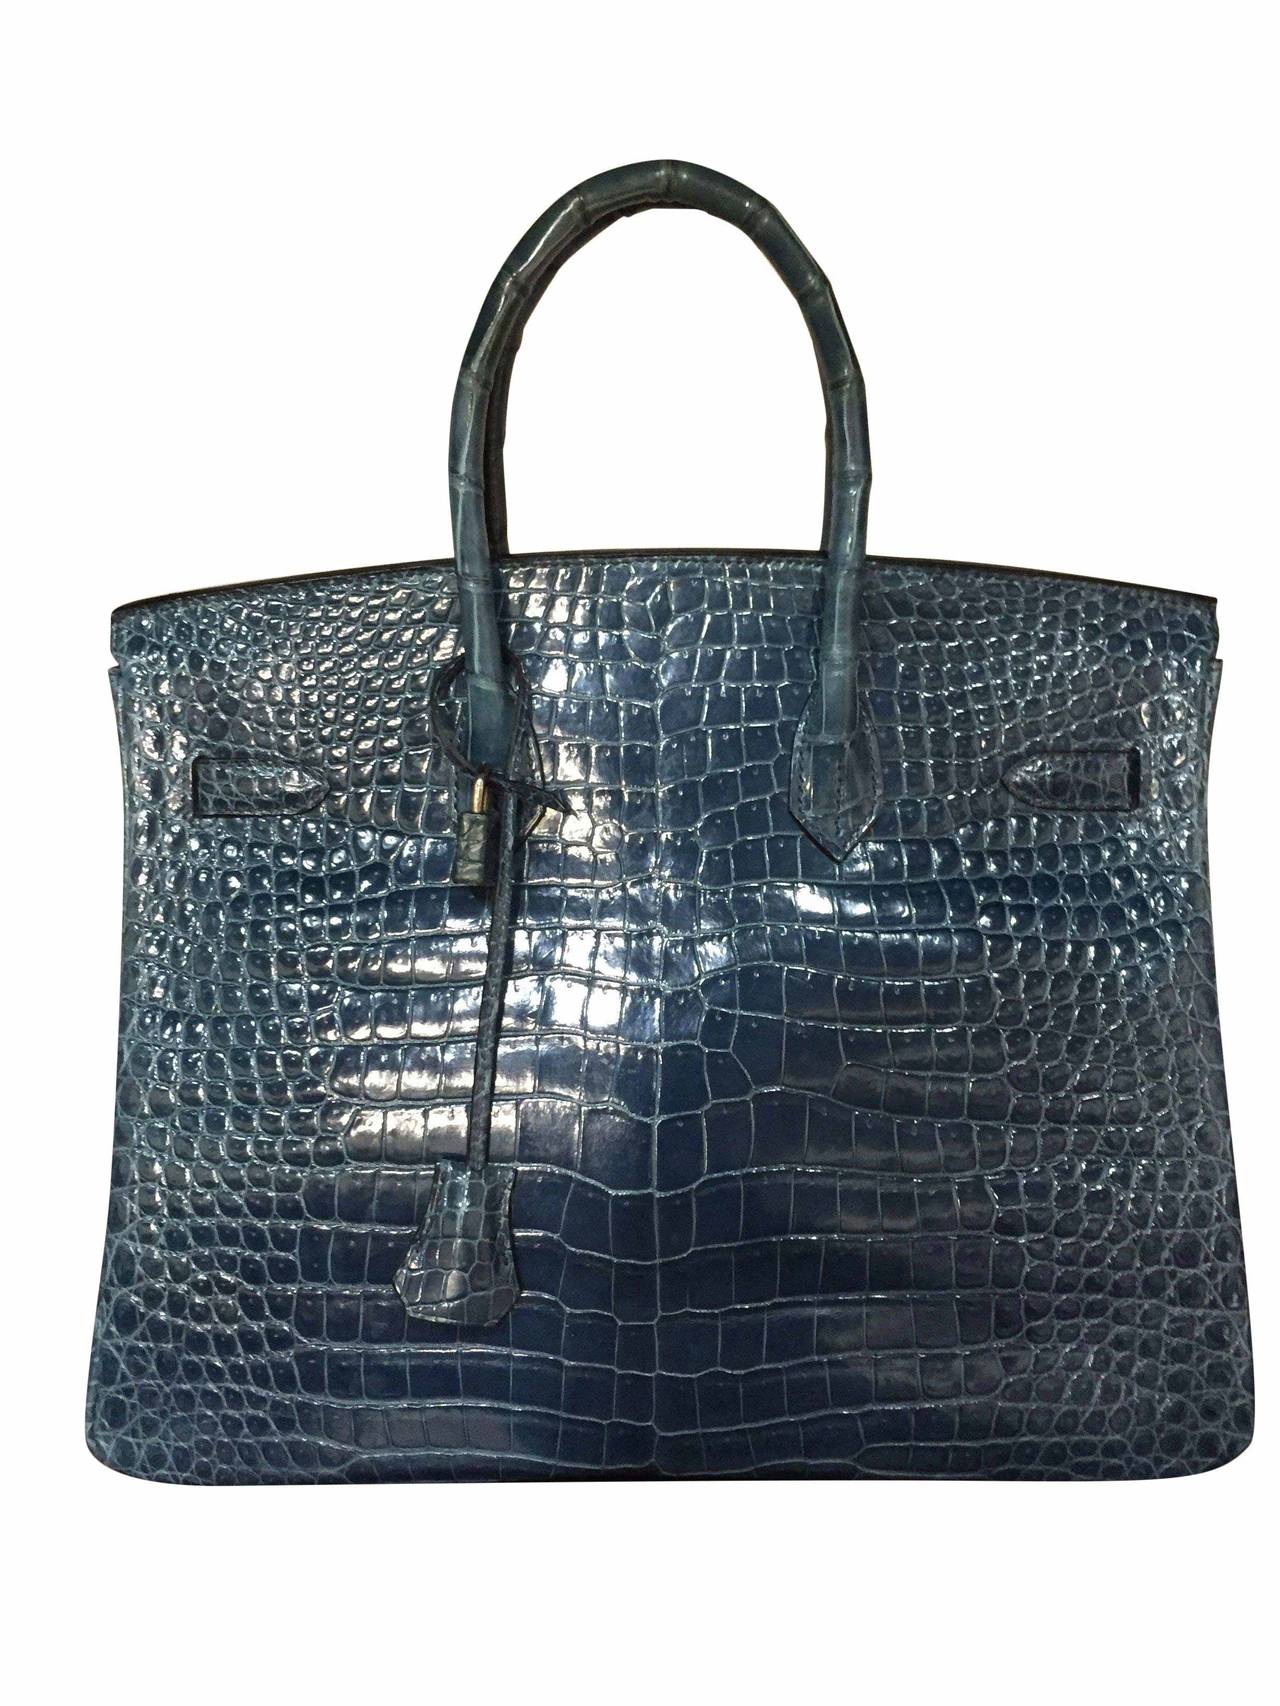 Hermès Birkin 35 Crocodile Porosus
Bleu Abysse
Chevre lining
Palladium hardware
 
Stamp K in square
Hermès Paris Made in France.
 
Skin is 9/10.
No scratches
Corners are excellent. Odorless.
Safe shipping.
100% Authentic – Trusted